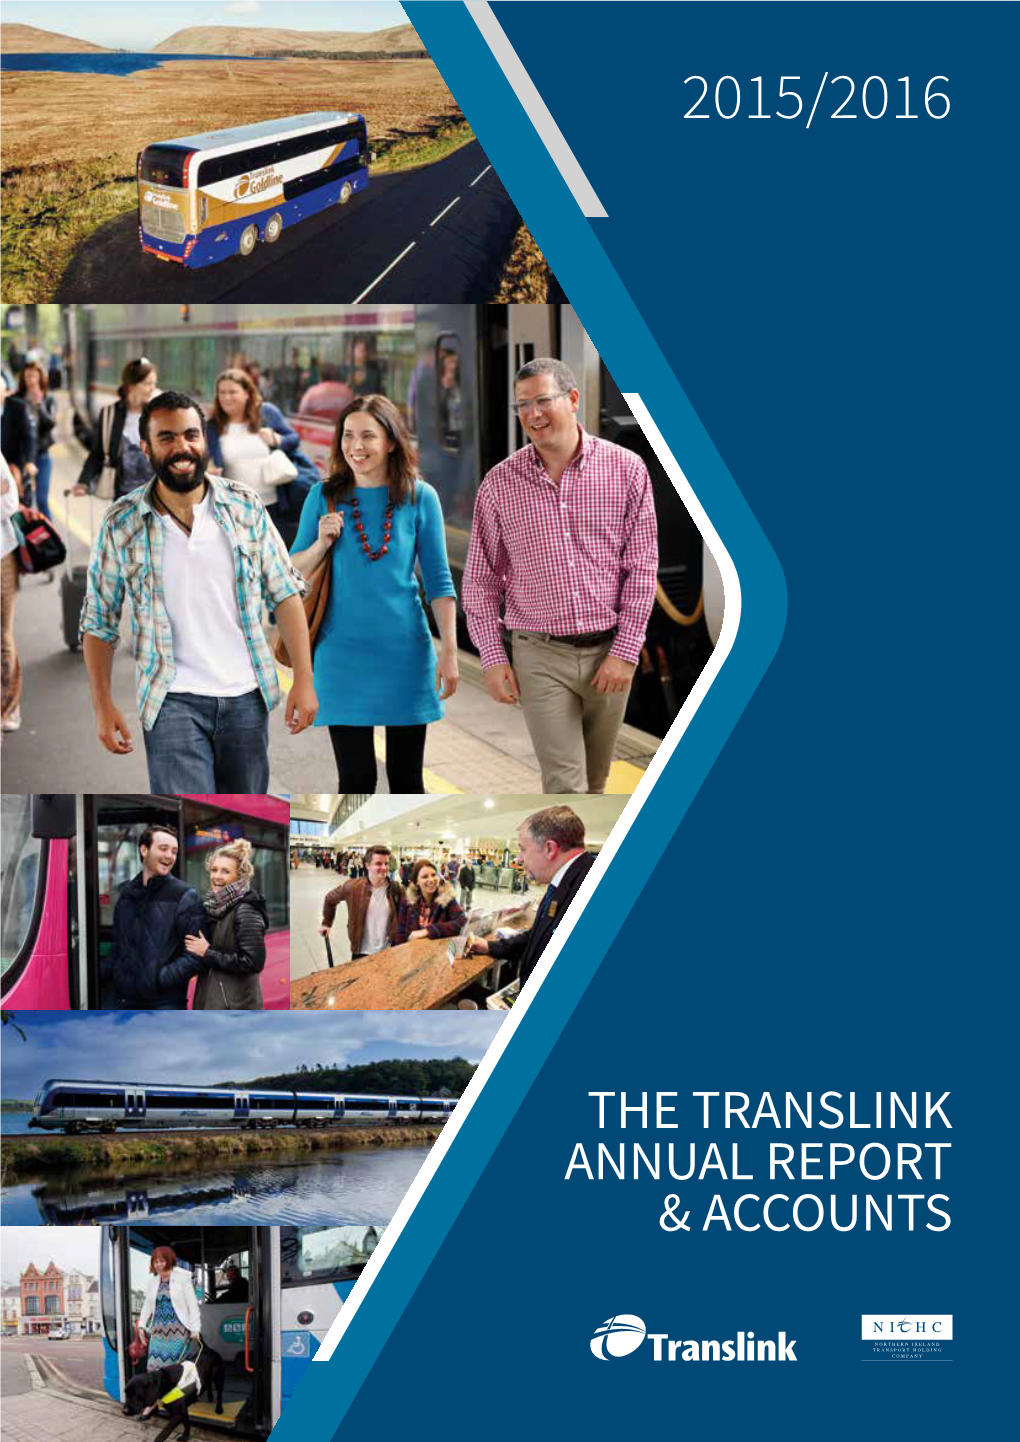 The Translink Annual Report & Accounts